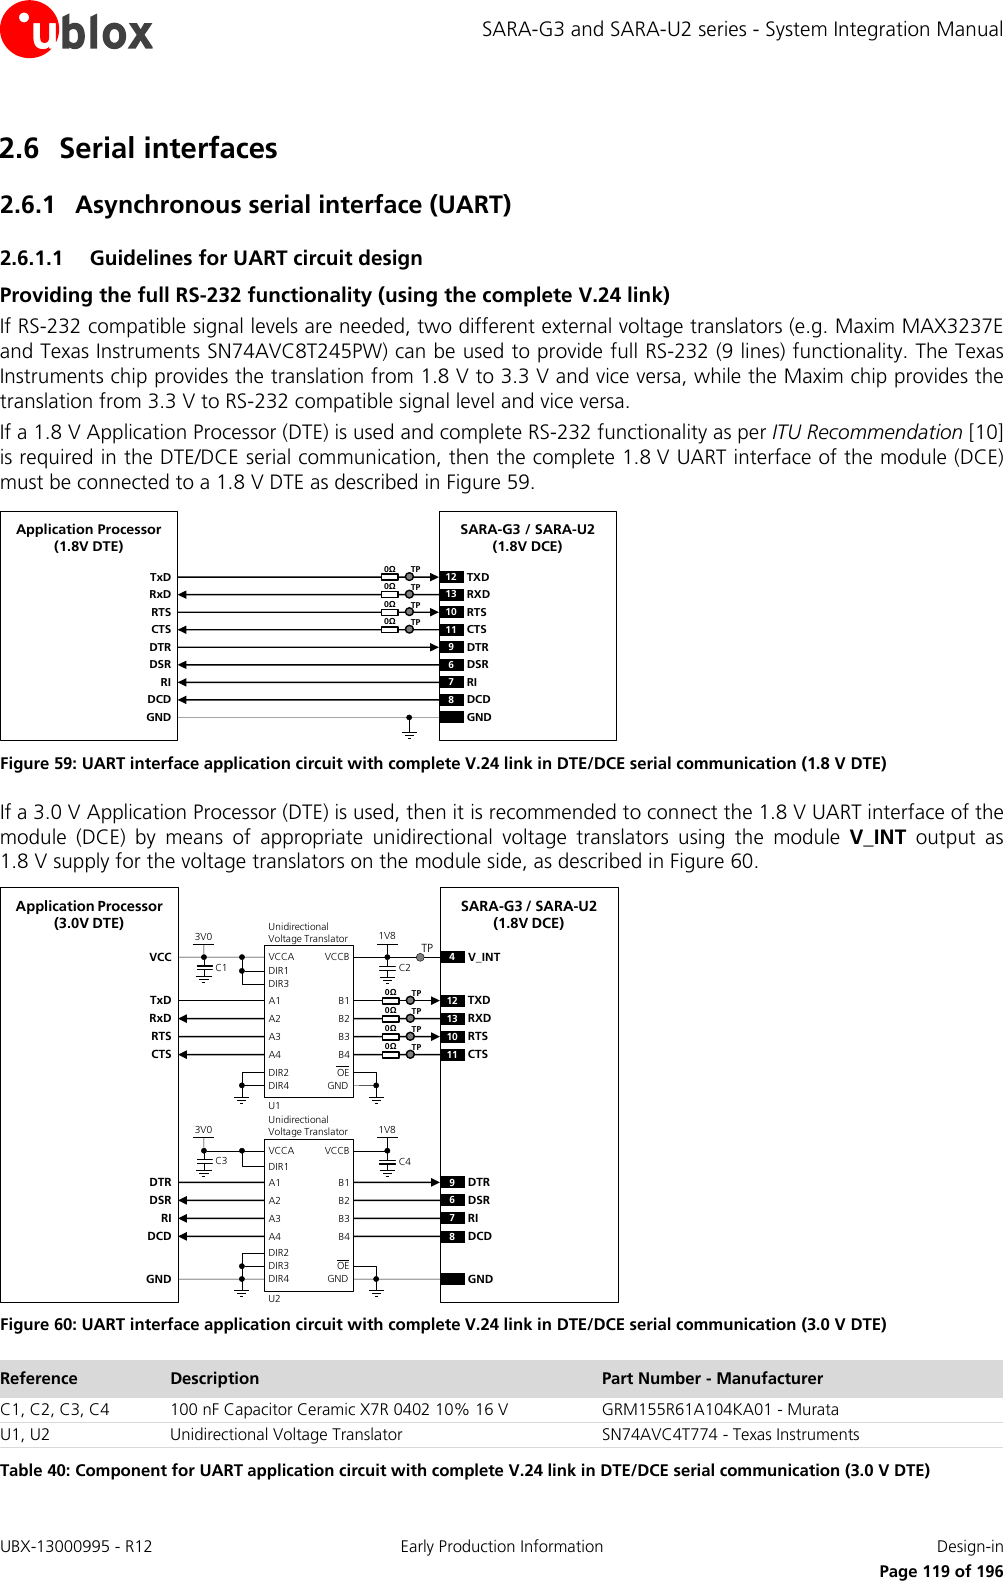 SARA-G3 and SARA-U2 series - System Integration Manual 2.6 Serial interfaces 2.6.1 Asynchronous serial interface (UART) 2.6.1.1 Guidelines for UART circuit design Providing the full RS-232 functionality (using the complete V.24 link) If RS-232 compatible signal levels are needed, two different external voltage translators (e.g. Maxim MAX3237E and Texas Instruments SN74AVC8T245PW) can be used to provide full RS-232 (9 lines) functionality. The Texas Instruments chip provides the translation from 1.8 V to 3.3 V and vice versa, while the Maxim chip provides the translation from 3.3 V to RS-232 compatible signal level and vice versa. If a 1.8 V Application Processor (DTE) is used and complete RS-232 functionality as per ITU Recommendation [10] is required in the DTE/DCE serial communication, then the complete 1.8 V UART interface of the module (DCE) must be connected to a 1.8 V DTE as described in Figure 59. TxDApplication Processor(1.8V DTE)RxDRTSCTSDTRDSRRIDCDGNDSARA-G3 / SARA-U2(1.8V DCE)12TXD9DTR13RXD10RTS11CTS6DSR7RI8DCDGND0ΩTP0ΩTP0ΩTP0ΩTP Figure 59: UART interface application circuit with complete V.24 link in DTE/DCE serial communication (1.8 V DTE) If a 3.0 V Application Processor (DTE) is used, then it is recommended to connect the 1.8 V UART interface of the module (DCE) by means of appropriate unidirectional voltage translators using the module V_INT output as 1.8 V supply for the voltage translators on the module side, as described in Figure 60. 4V_INTTxDApplication Processor(3.0V DTE)RxDRTSCTSDTRDSRRIDCDGNDSARA-G3 / SARA-U2(1.8V DCE)12 TXD9DTR13 RXD10 RTS11 CTS6DSR7RI8DCDGND1V8B1 A1GNDU1B3A3VCCBVCCAUnidirectionalVoltage TranslatorC1 C23V0DIR3DIR2 OEDIR1VCCB2 A2B4A4DIR41V8B1 A1GNDU2B3A3VCCBVCCAUnidirectionalVoltage TranslatorC3 C43V0DIR1DIR3 OEB2 A2B4A4DIR4DIR2TP0ΩTP0ΩTP0ΩTP0ΩTP Figure 60: UART interface application circuit with complete V.24 link in DTE/DCE serial communication (3.0 V DTE) Reference Description Part Number - Manufacturer C1, C2, C3, C4 100 nF Capacitor Ceramic X7R 0402 10% 16 V GRM155R61A104KA01 - Murata U1, U2 Unidirectional Voltage Translator SN74AVC4T774 - Texas Instruments Table 40: Component for UART application circuit with complete V.24 link in DTE/DCE serial communication (3.0 V DTE) UBX-13000995 - R12 Early Production Information Design-in     Page 119 of 196 